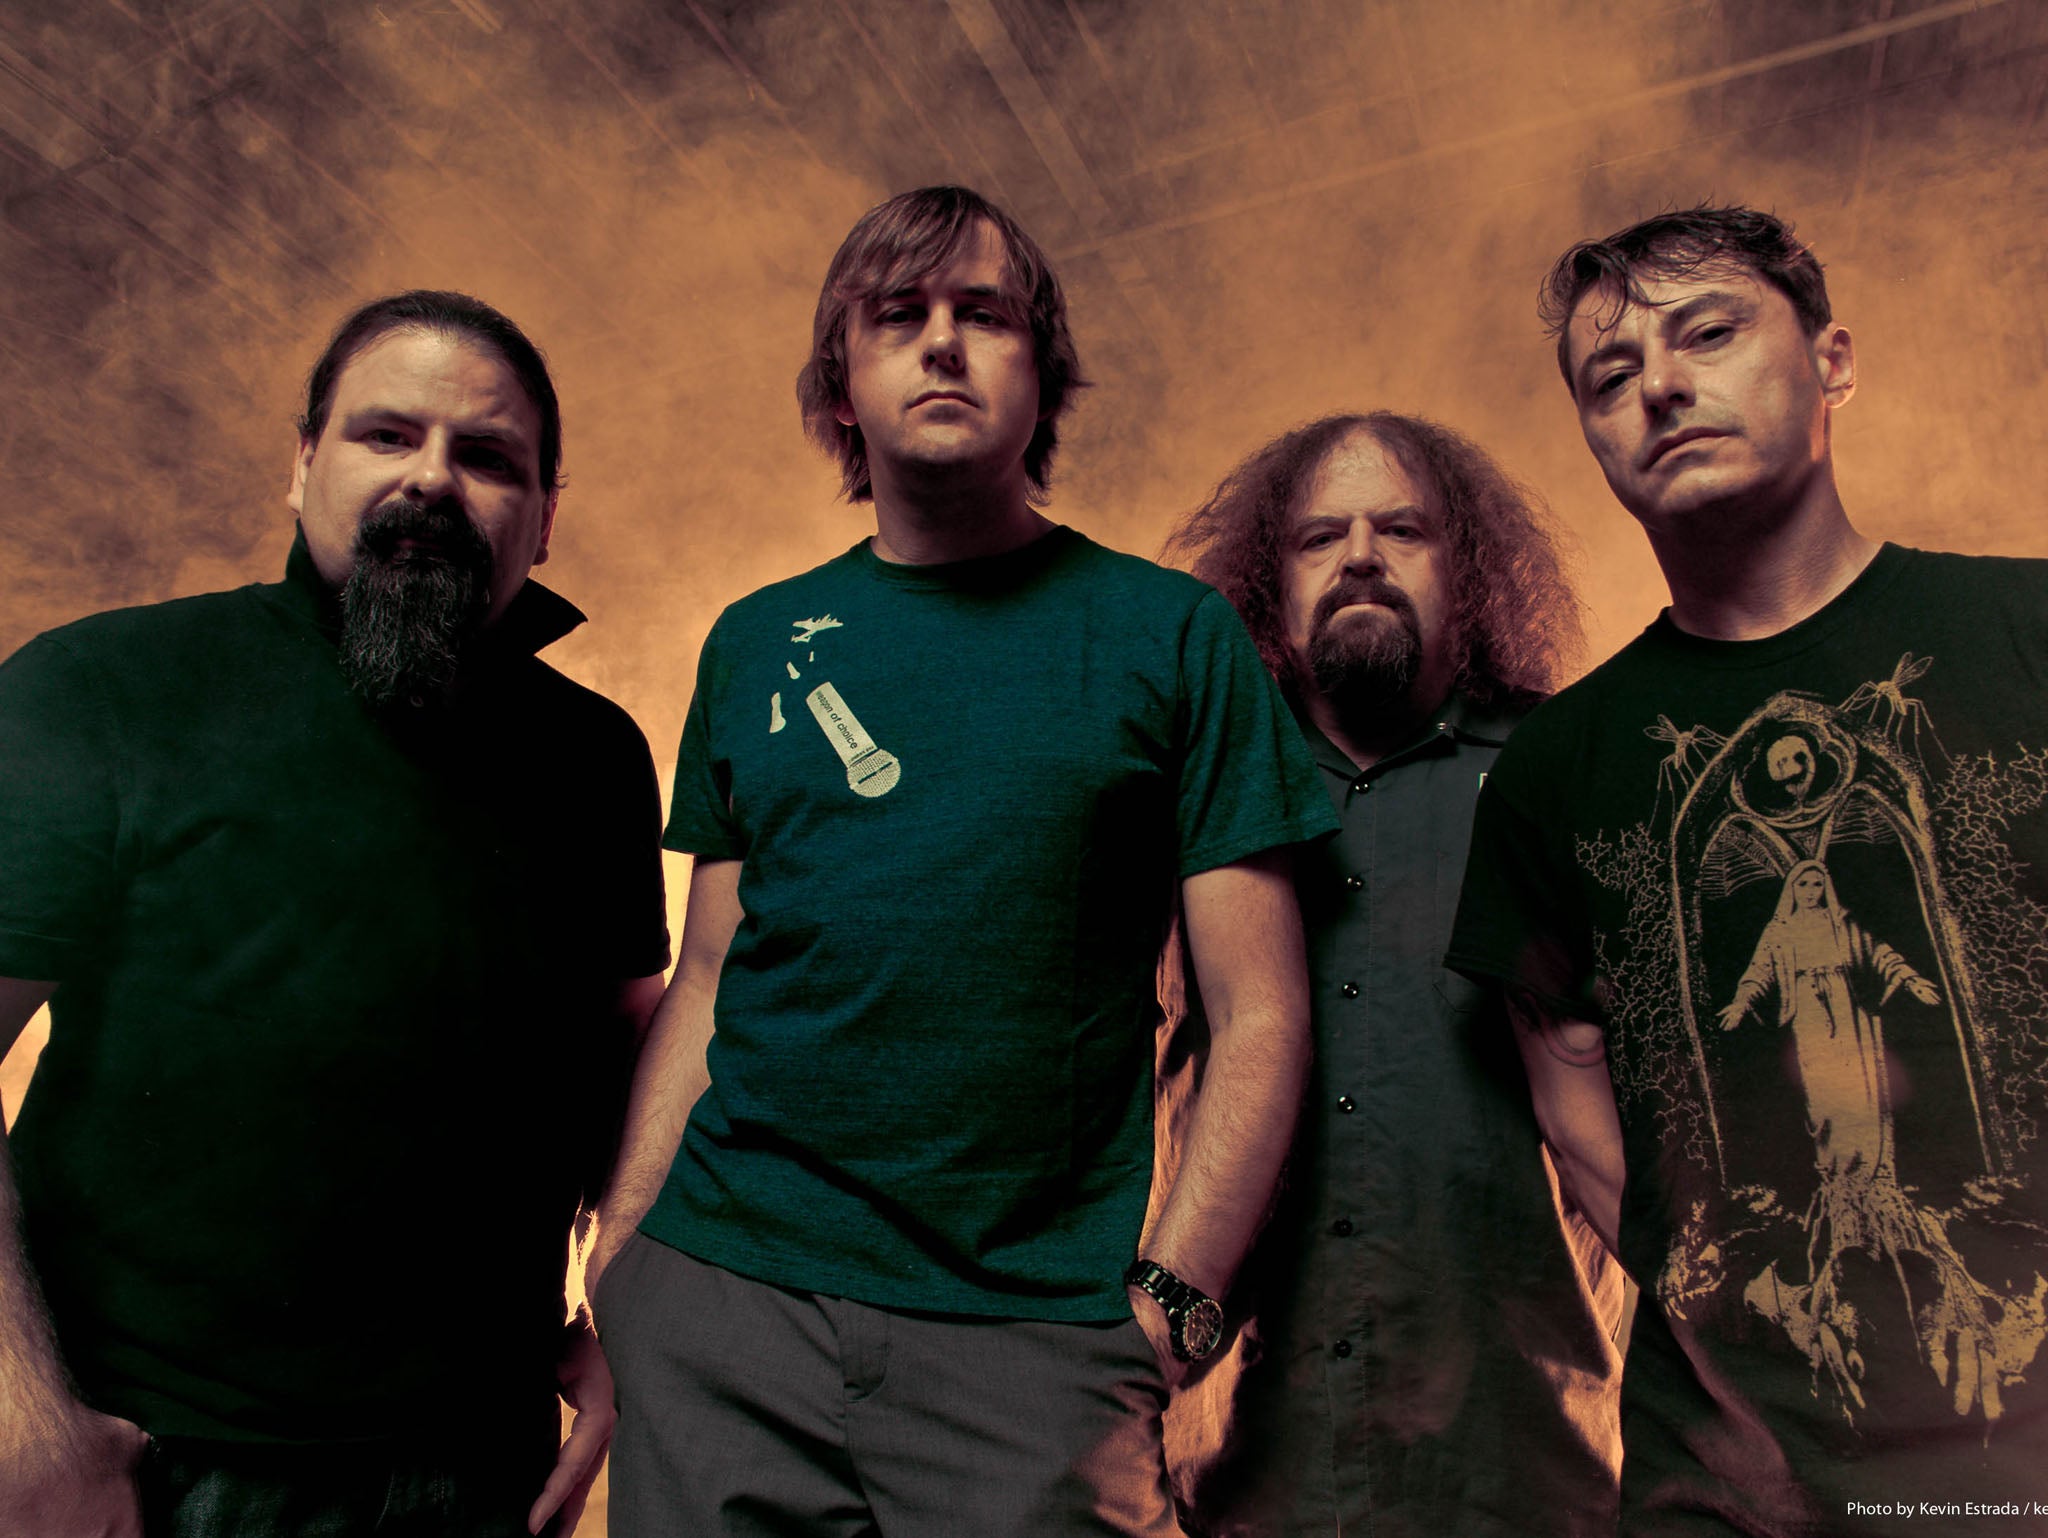 Barney Greenway (second left) with British grindcore band Napalm Death